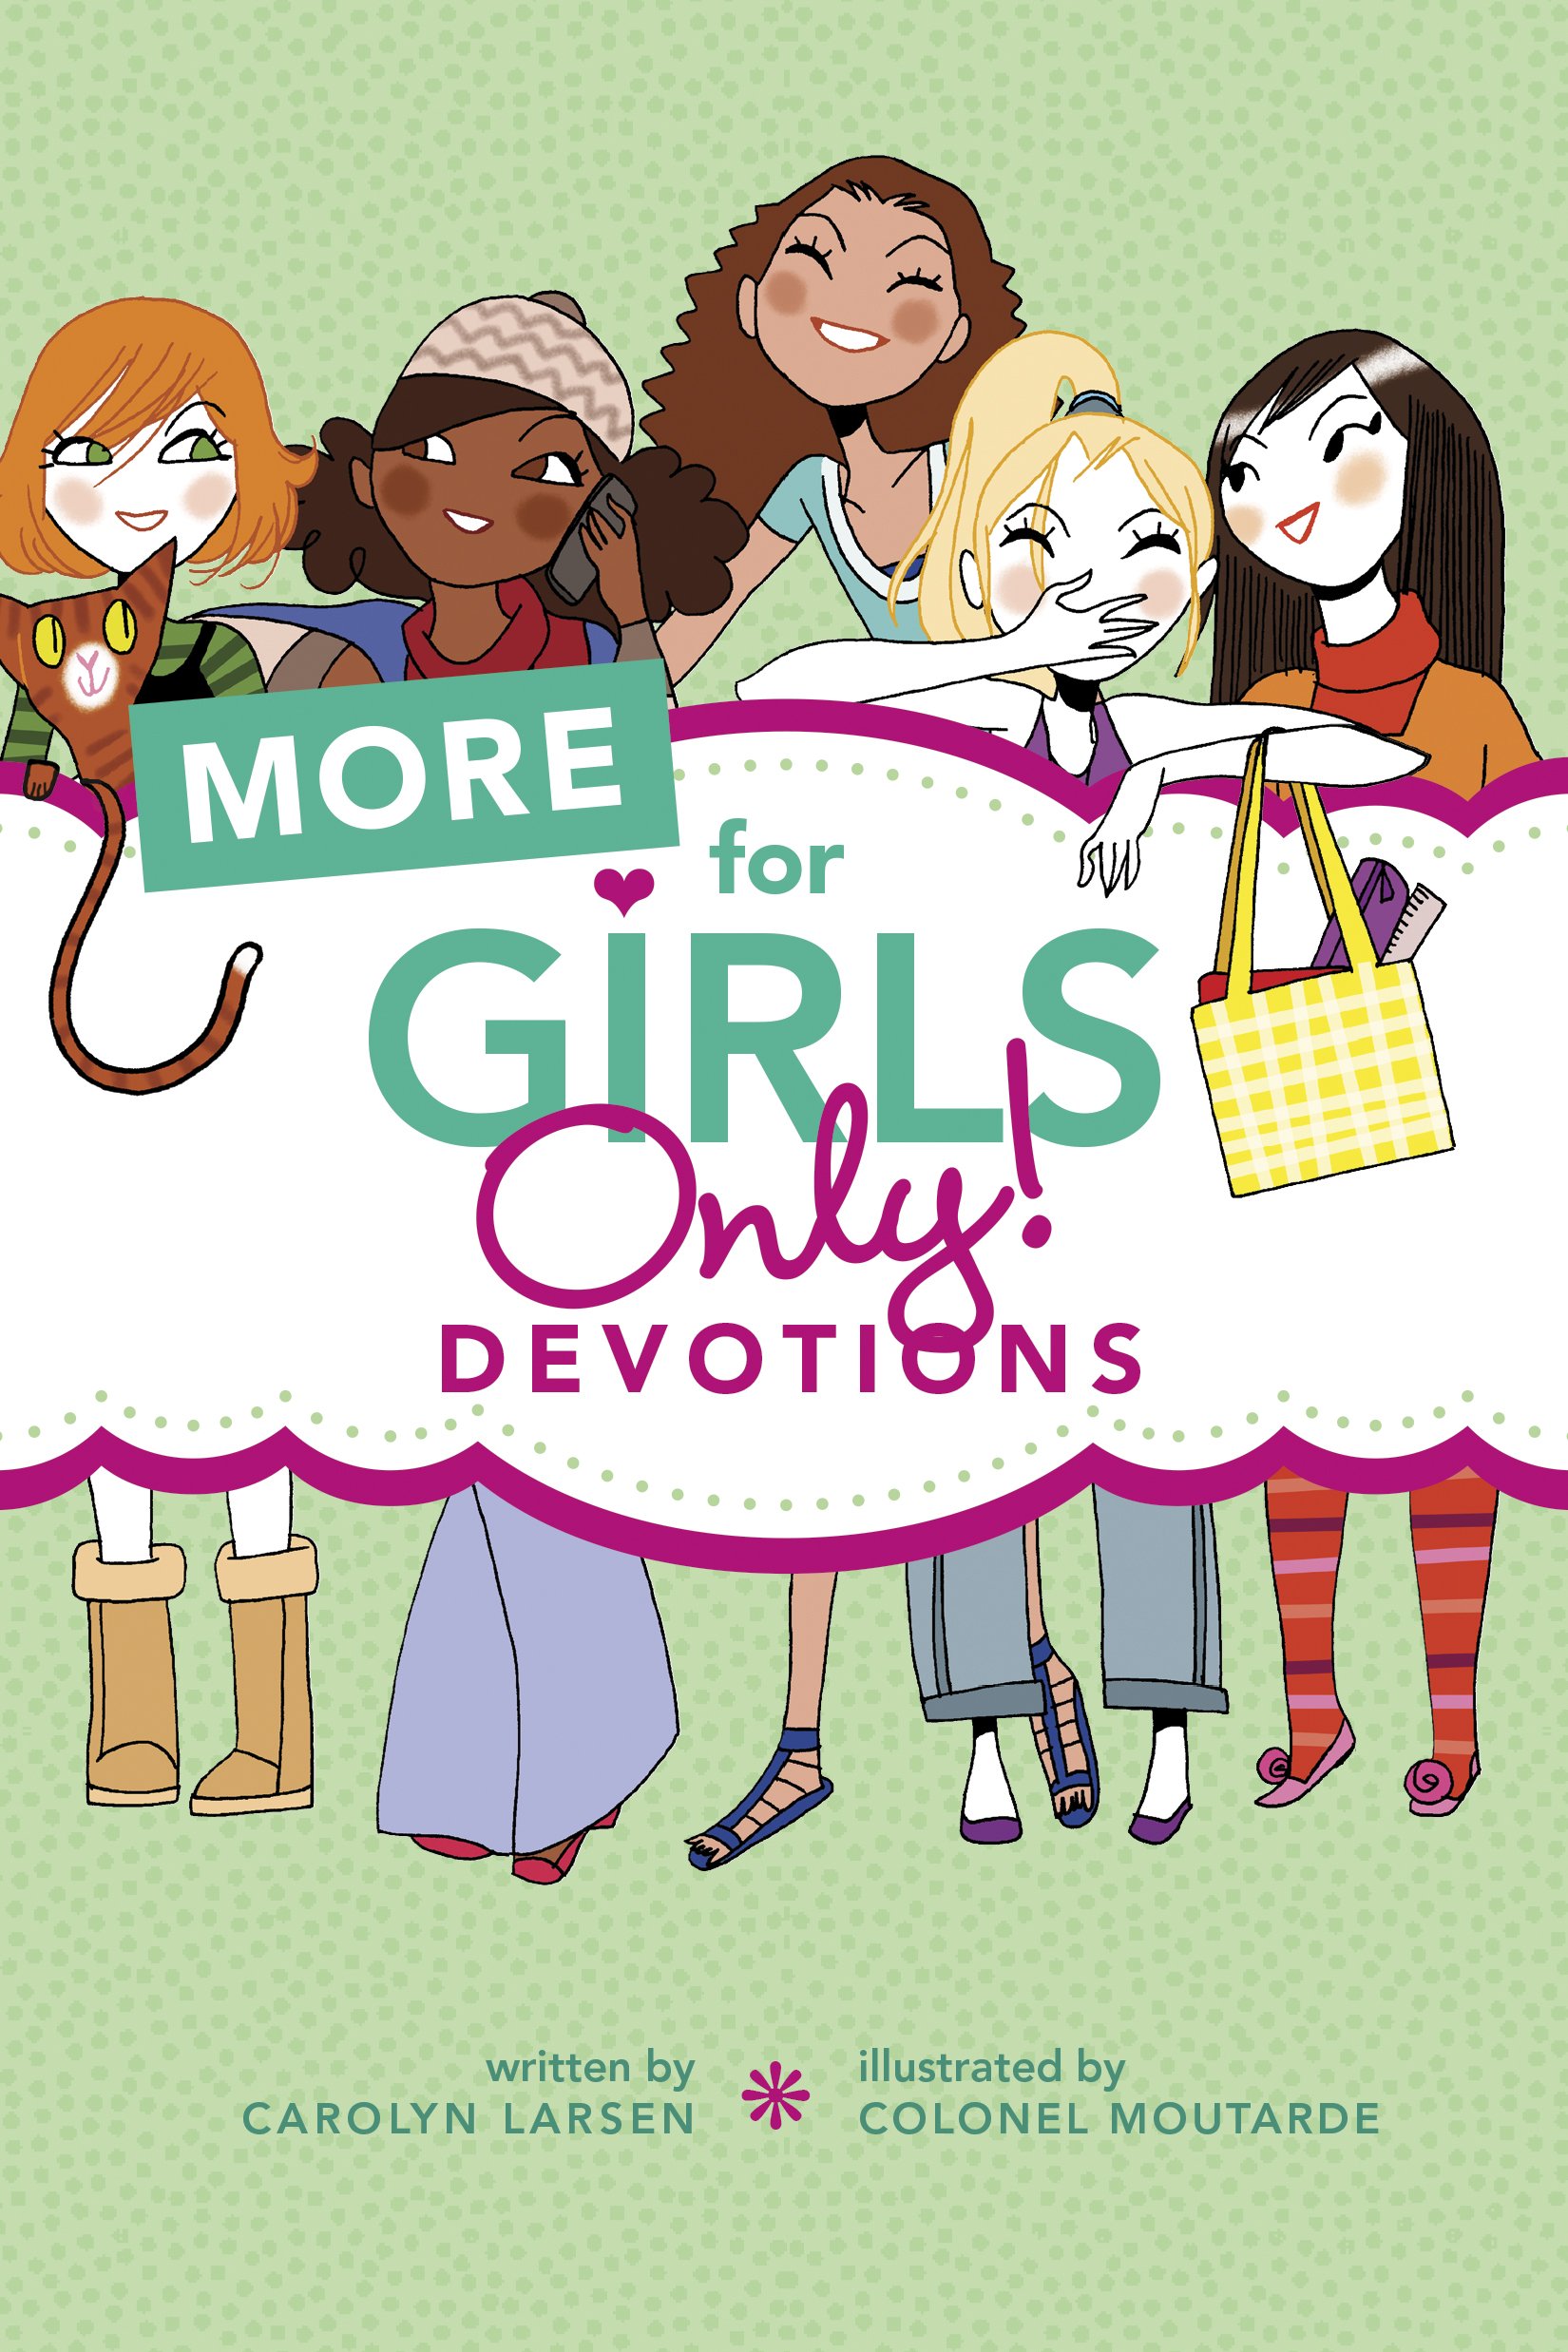 More for Girls Only Devotions: A Book Review